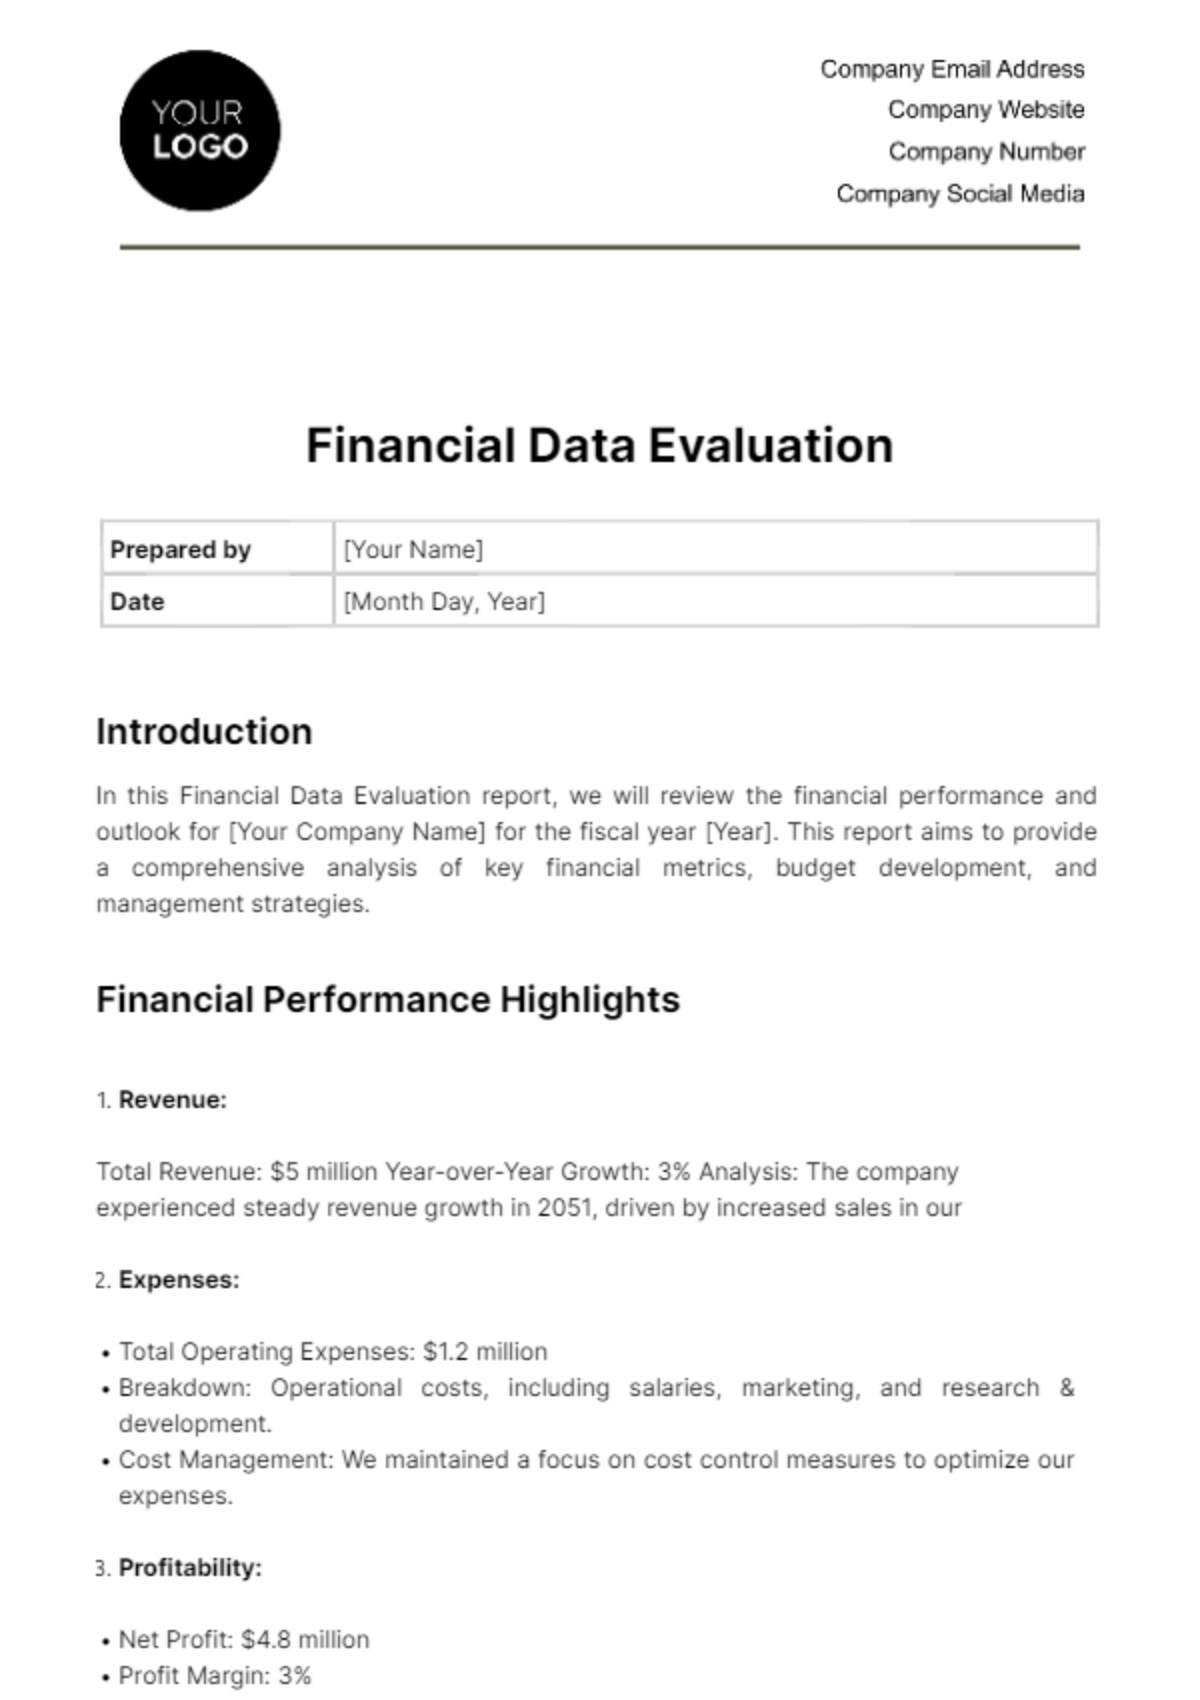 Free Financial Data Evaluation Template